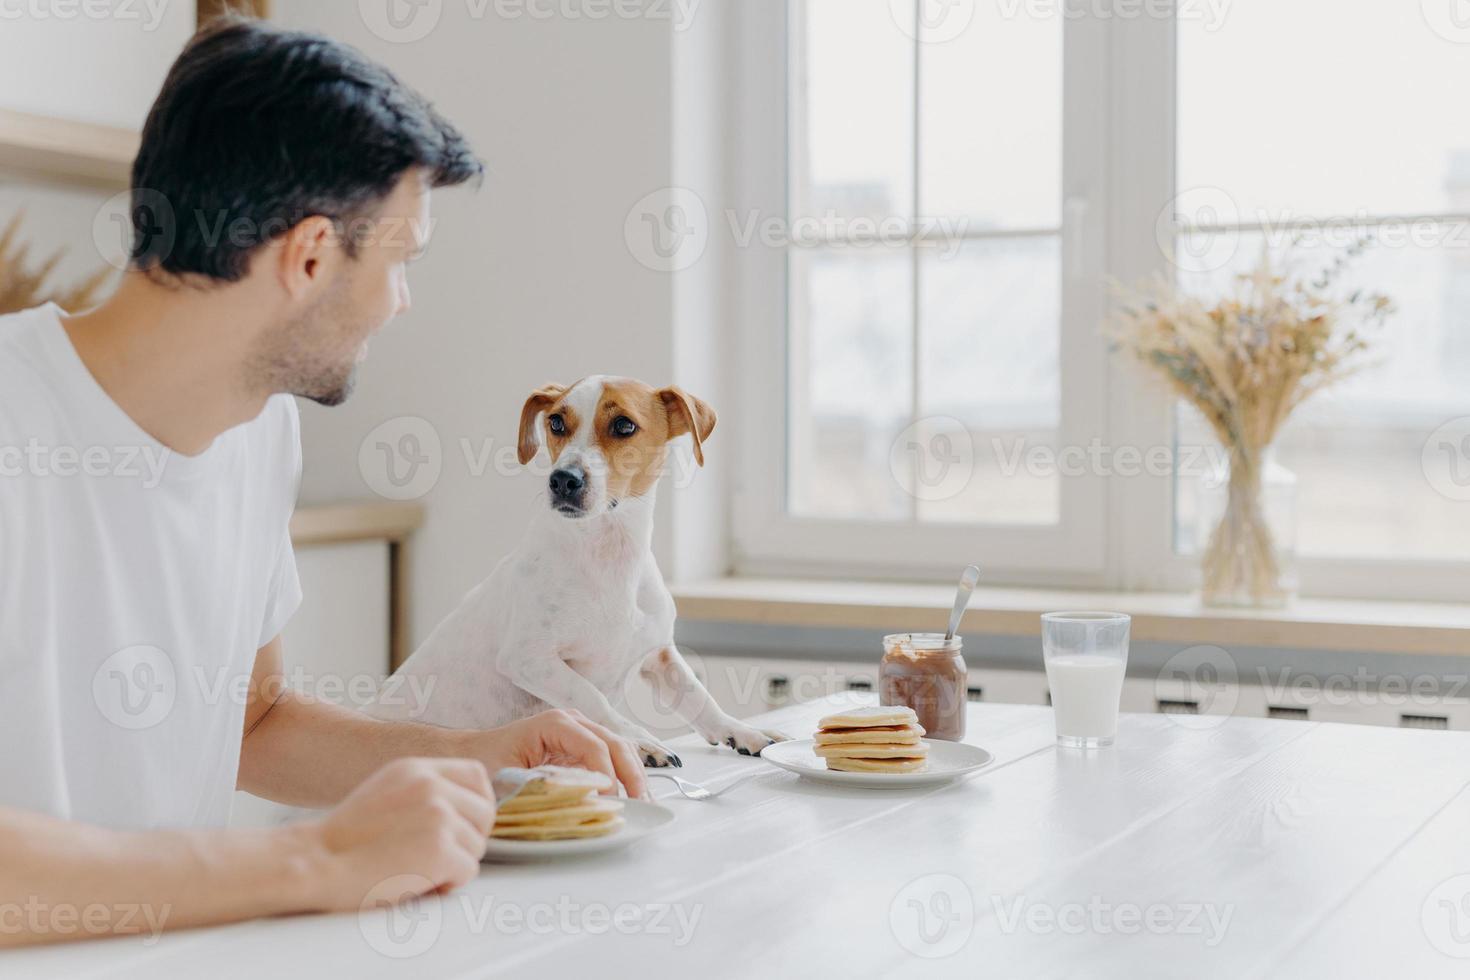 Horizontal shot of man and dog eat together, pose at kitchen table against big windoww, look at each other, have good relationship, enjoy domestic atmosphere. Home, animals, nutrition concept photo